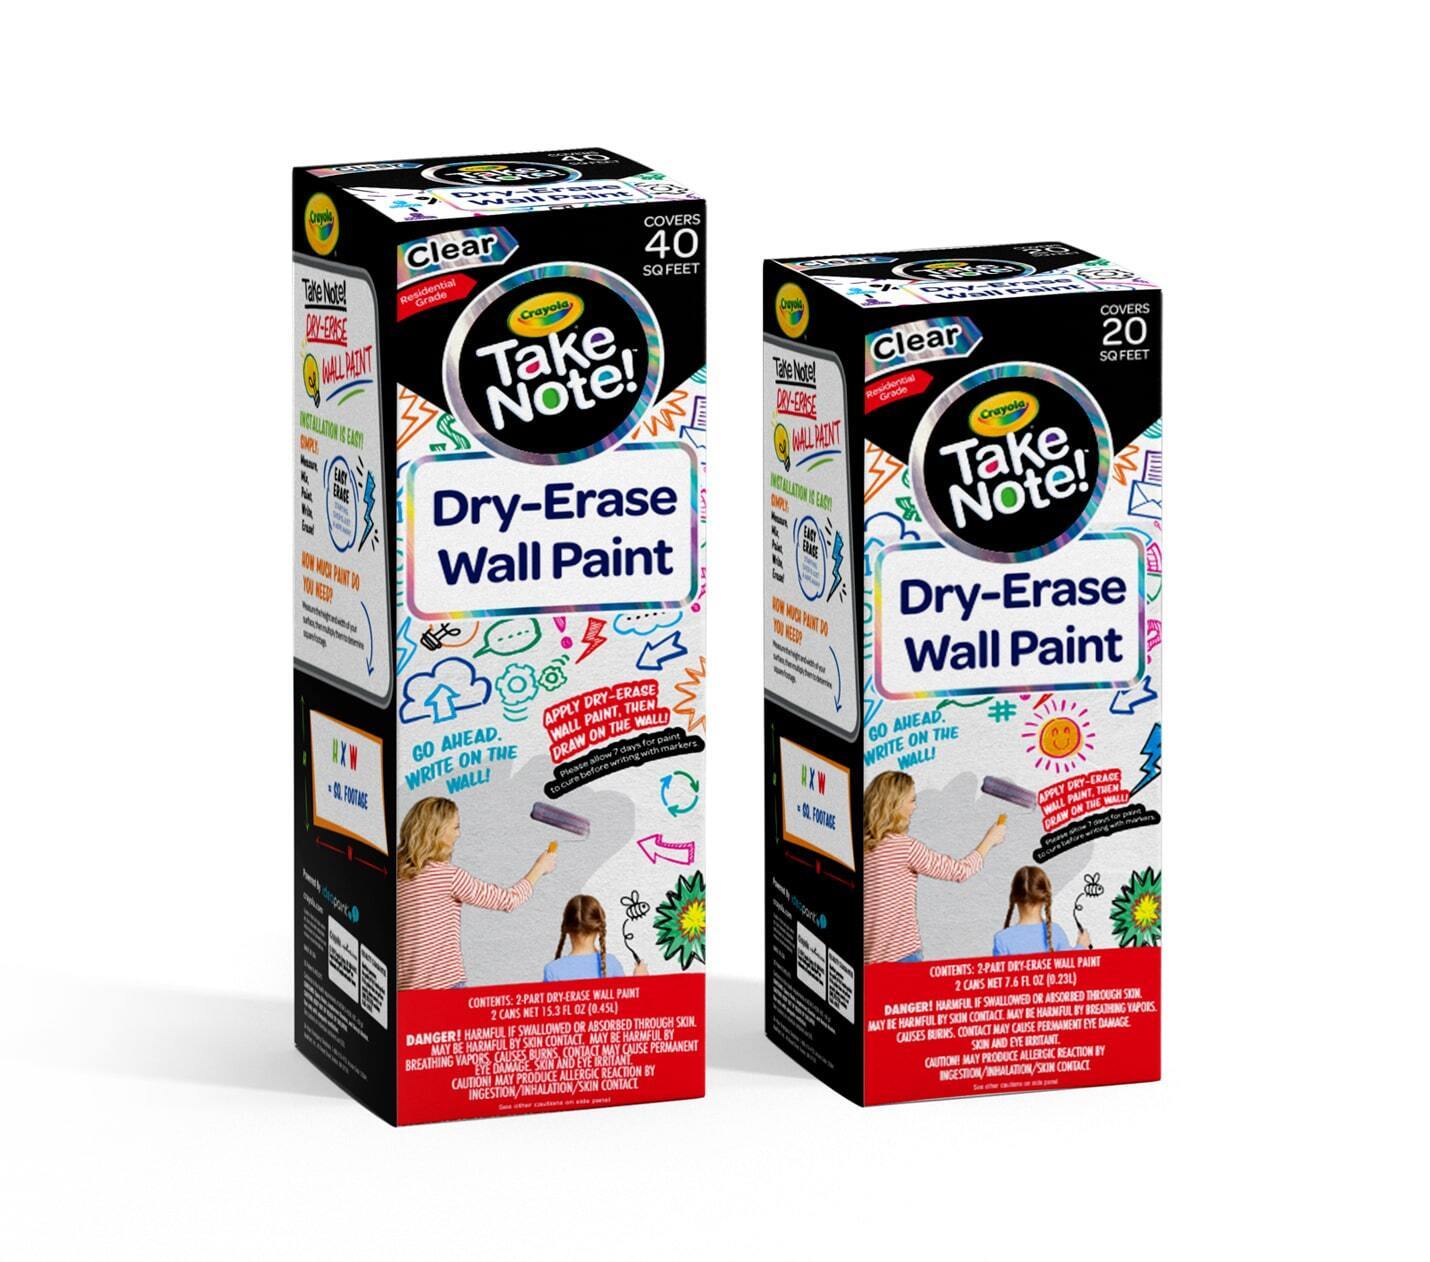 CRAYOLA® TAKE NOTE! DRY ERASE WALL PAINT 40 Sq Ft Kit-Exeter Paint Stores